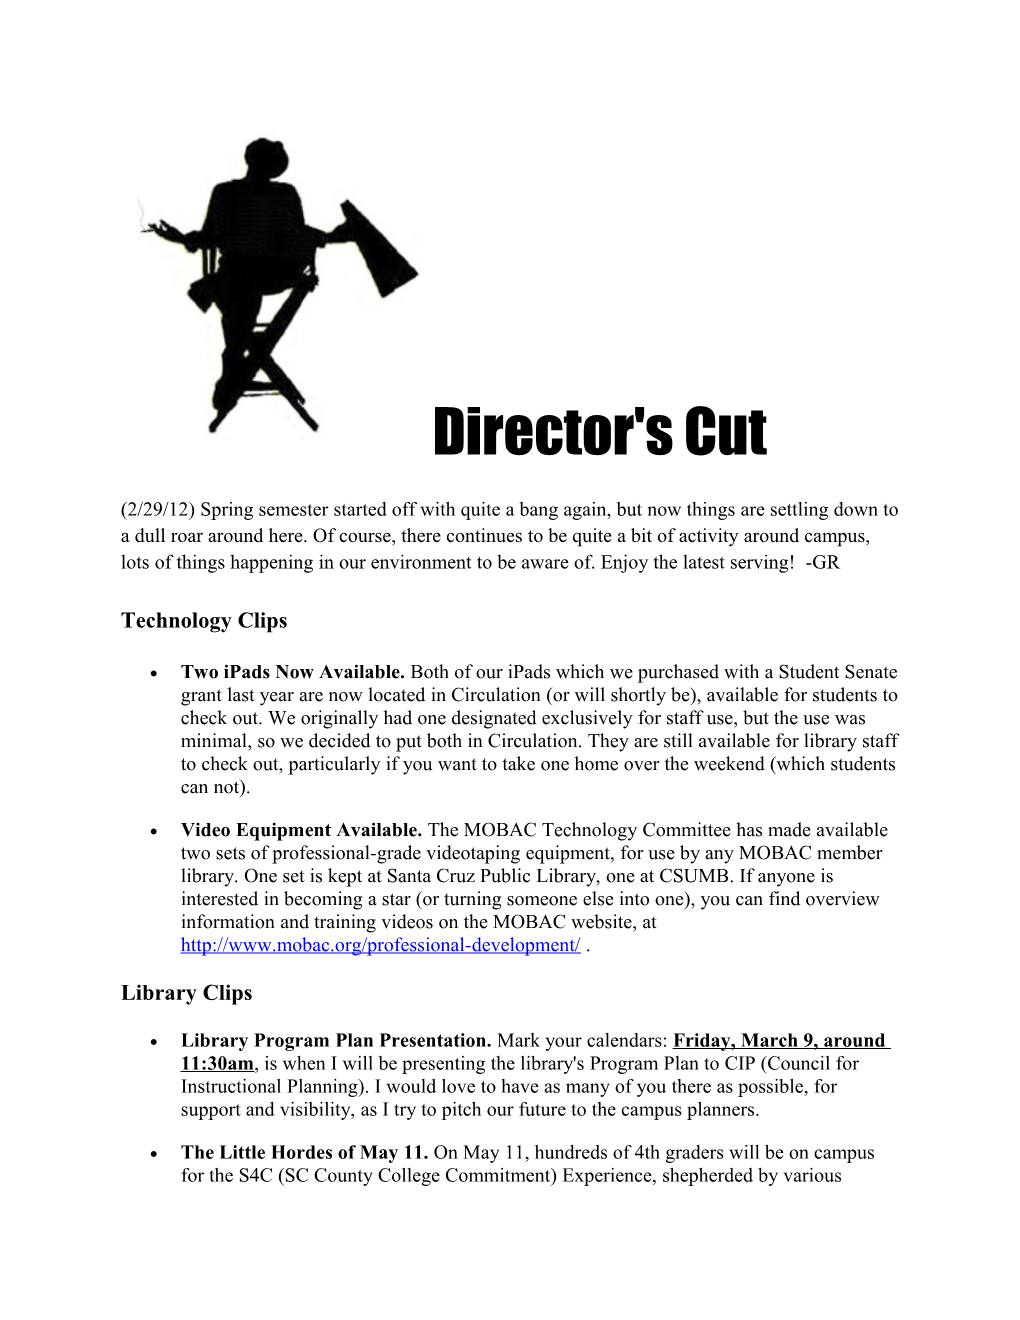 Director's Cut (2/29/12) Spring Semester Started Off with Quite a Bang Again, but Now